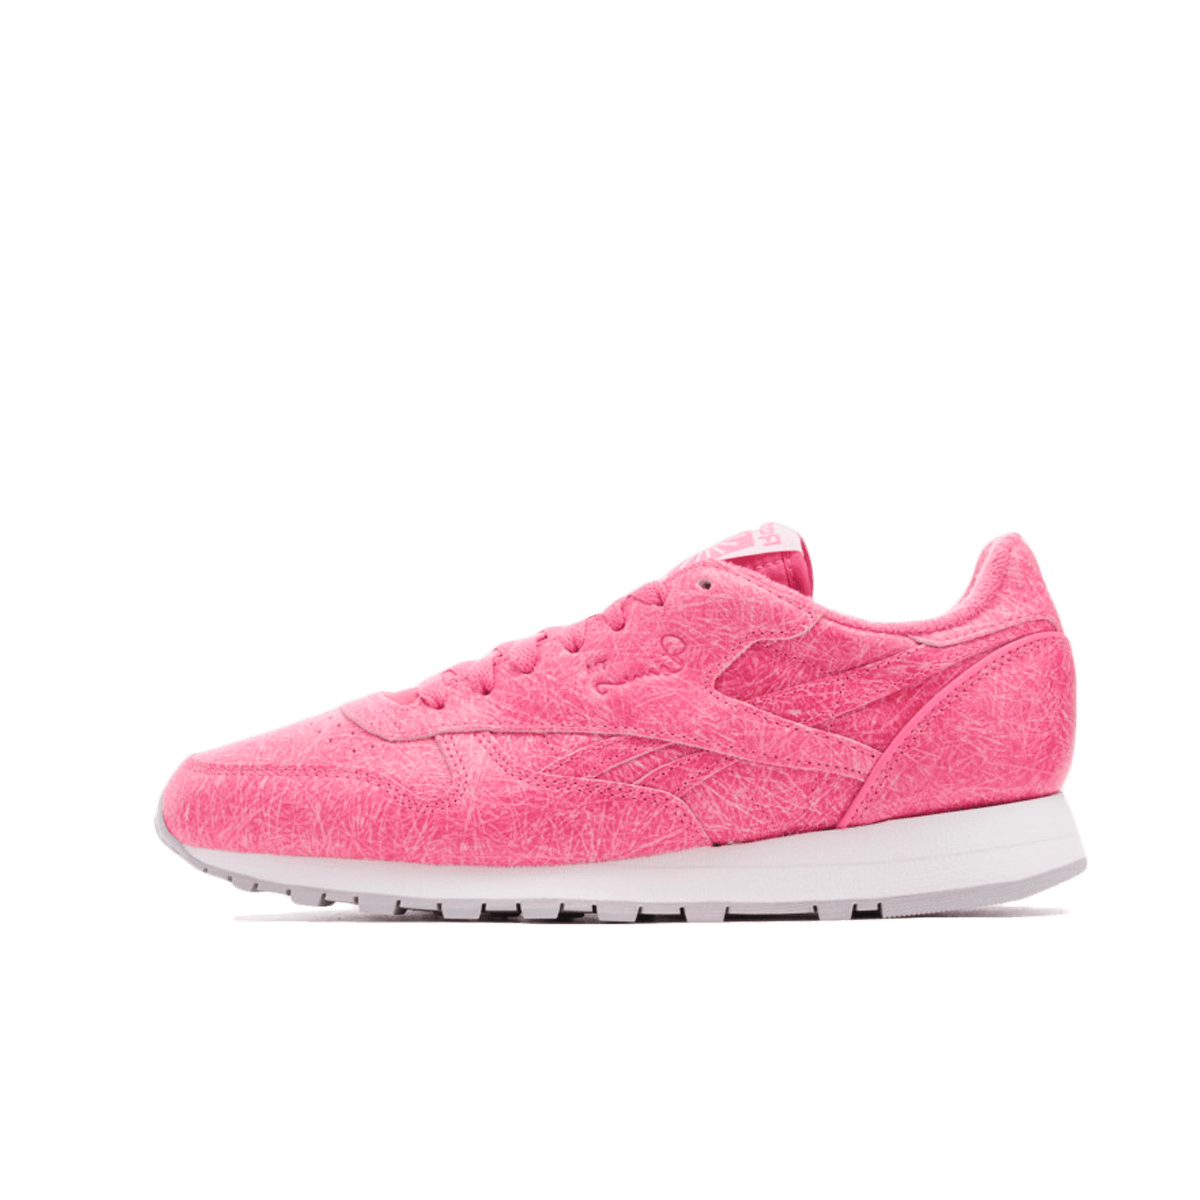 Eames Office x Reebok Classic Leather 'Astro Pink' FZ5860